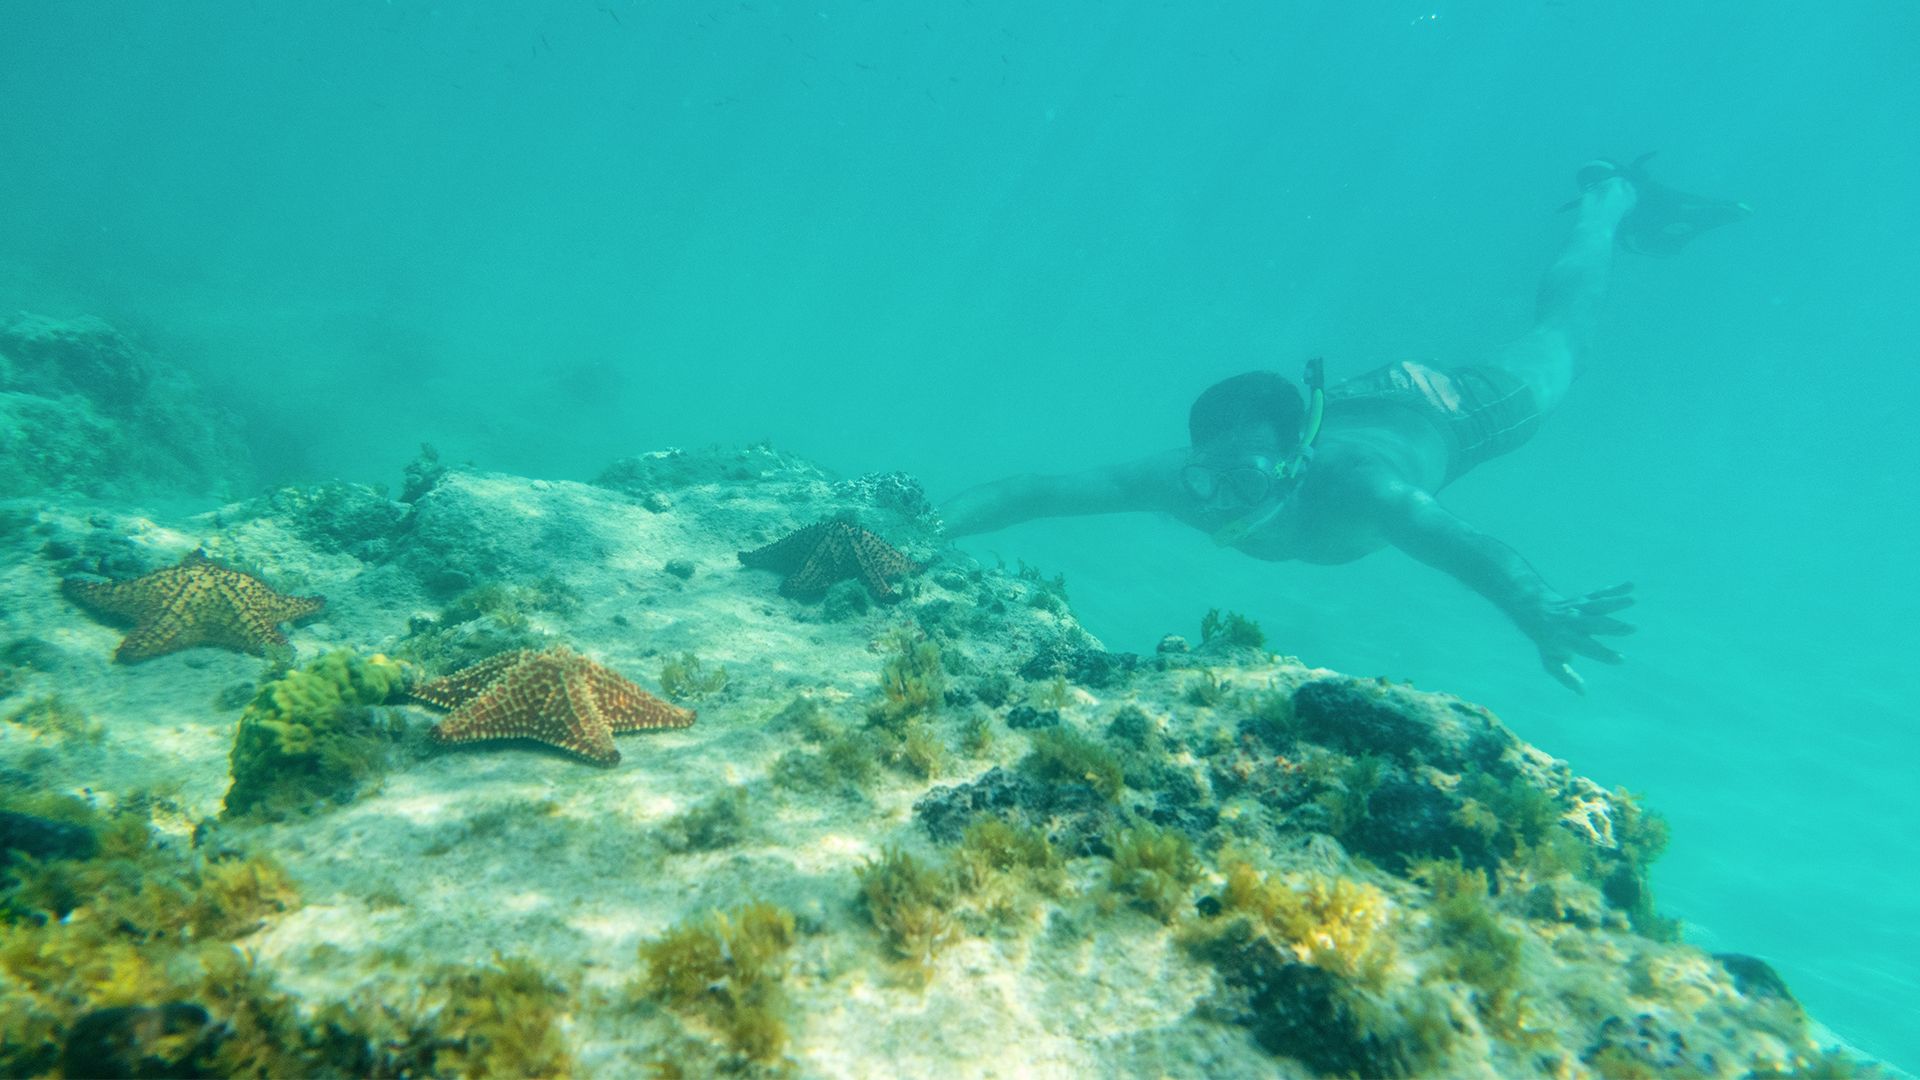 Snorkeling in Punta Cana: avoid the high expectations